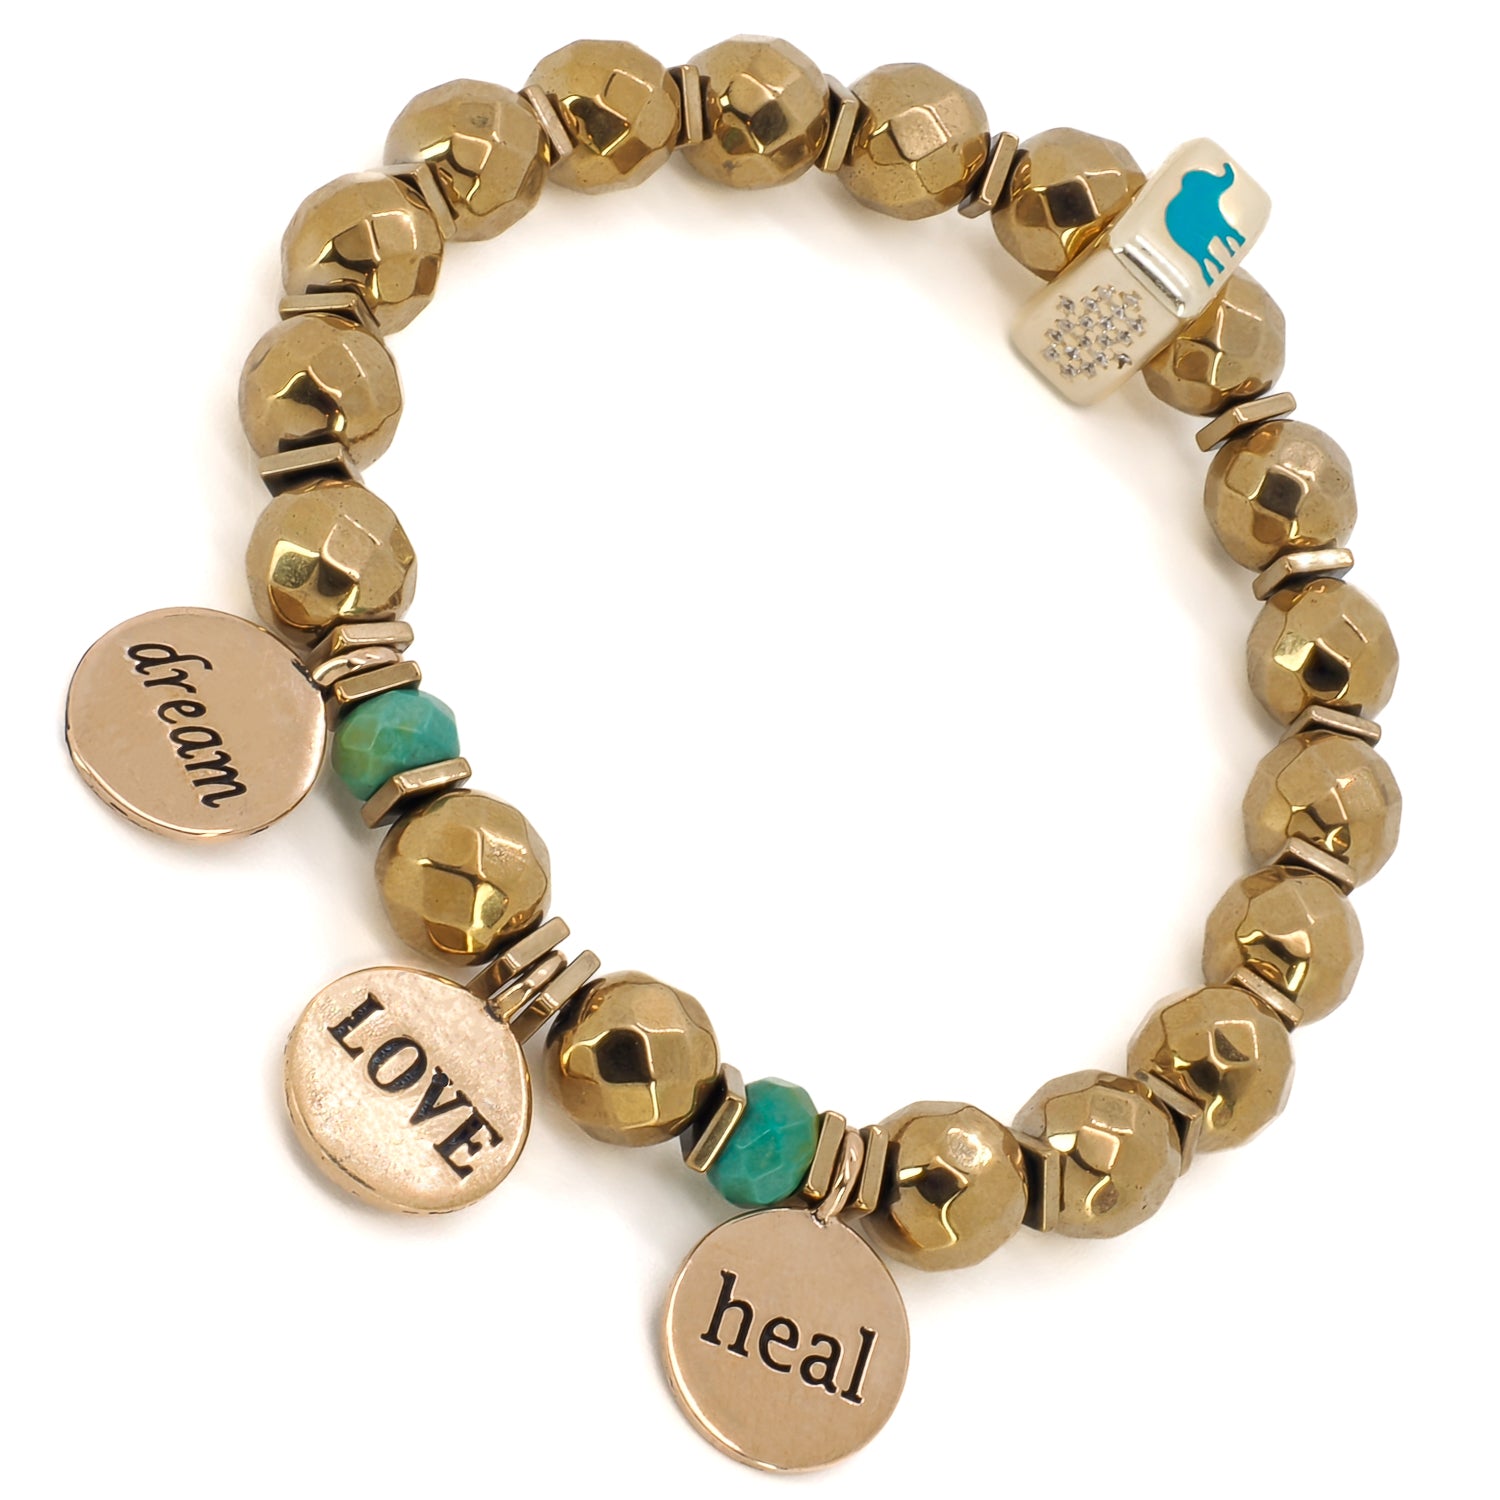 The bronze dream, love, and heal charms add a touch of elegance and meaning to the bracelet.